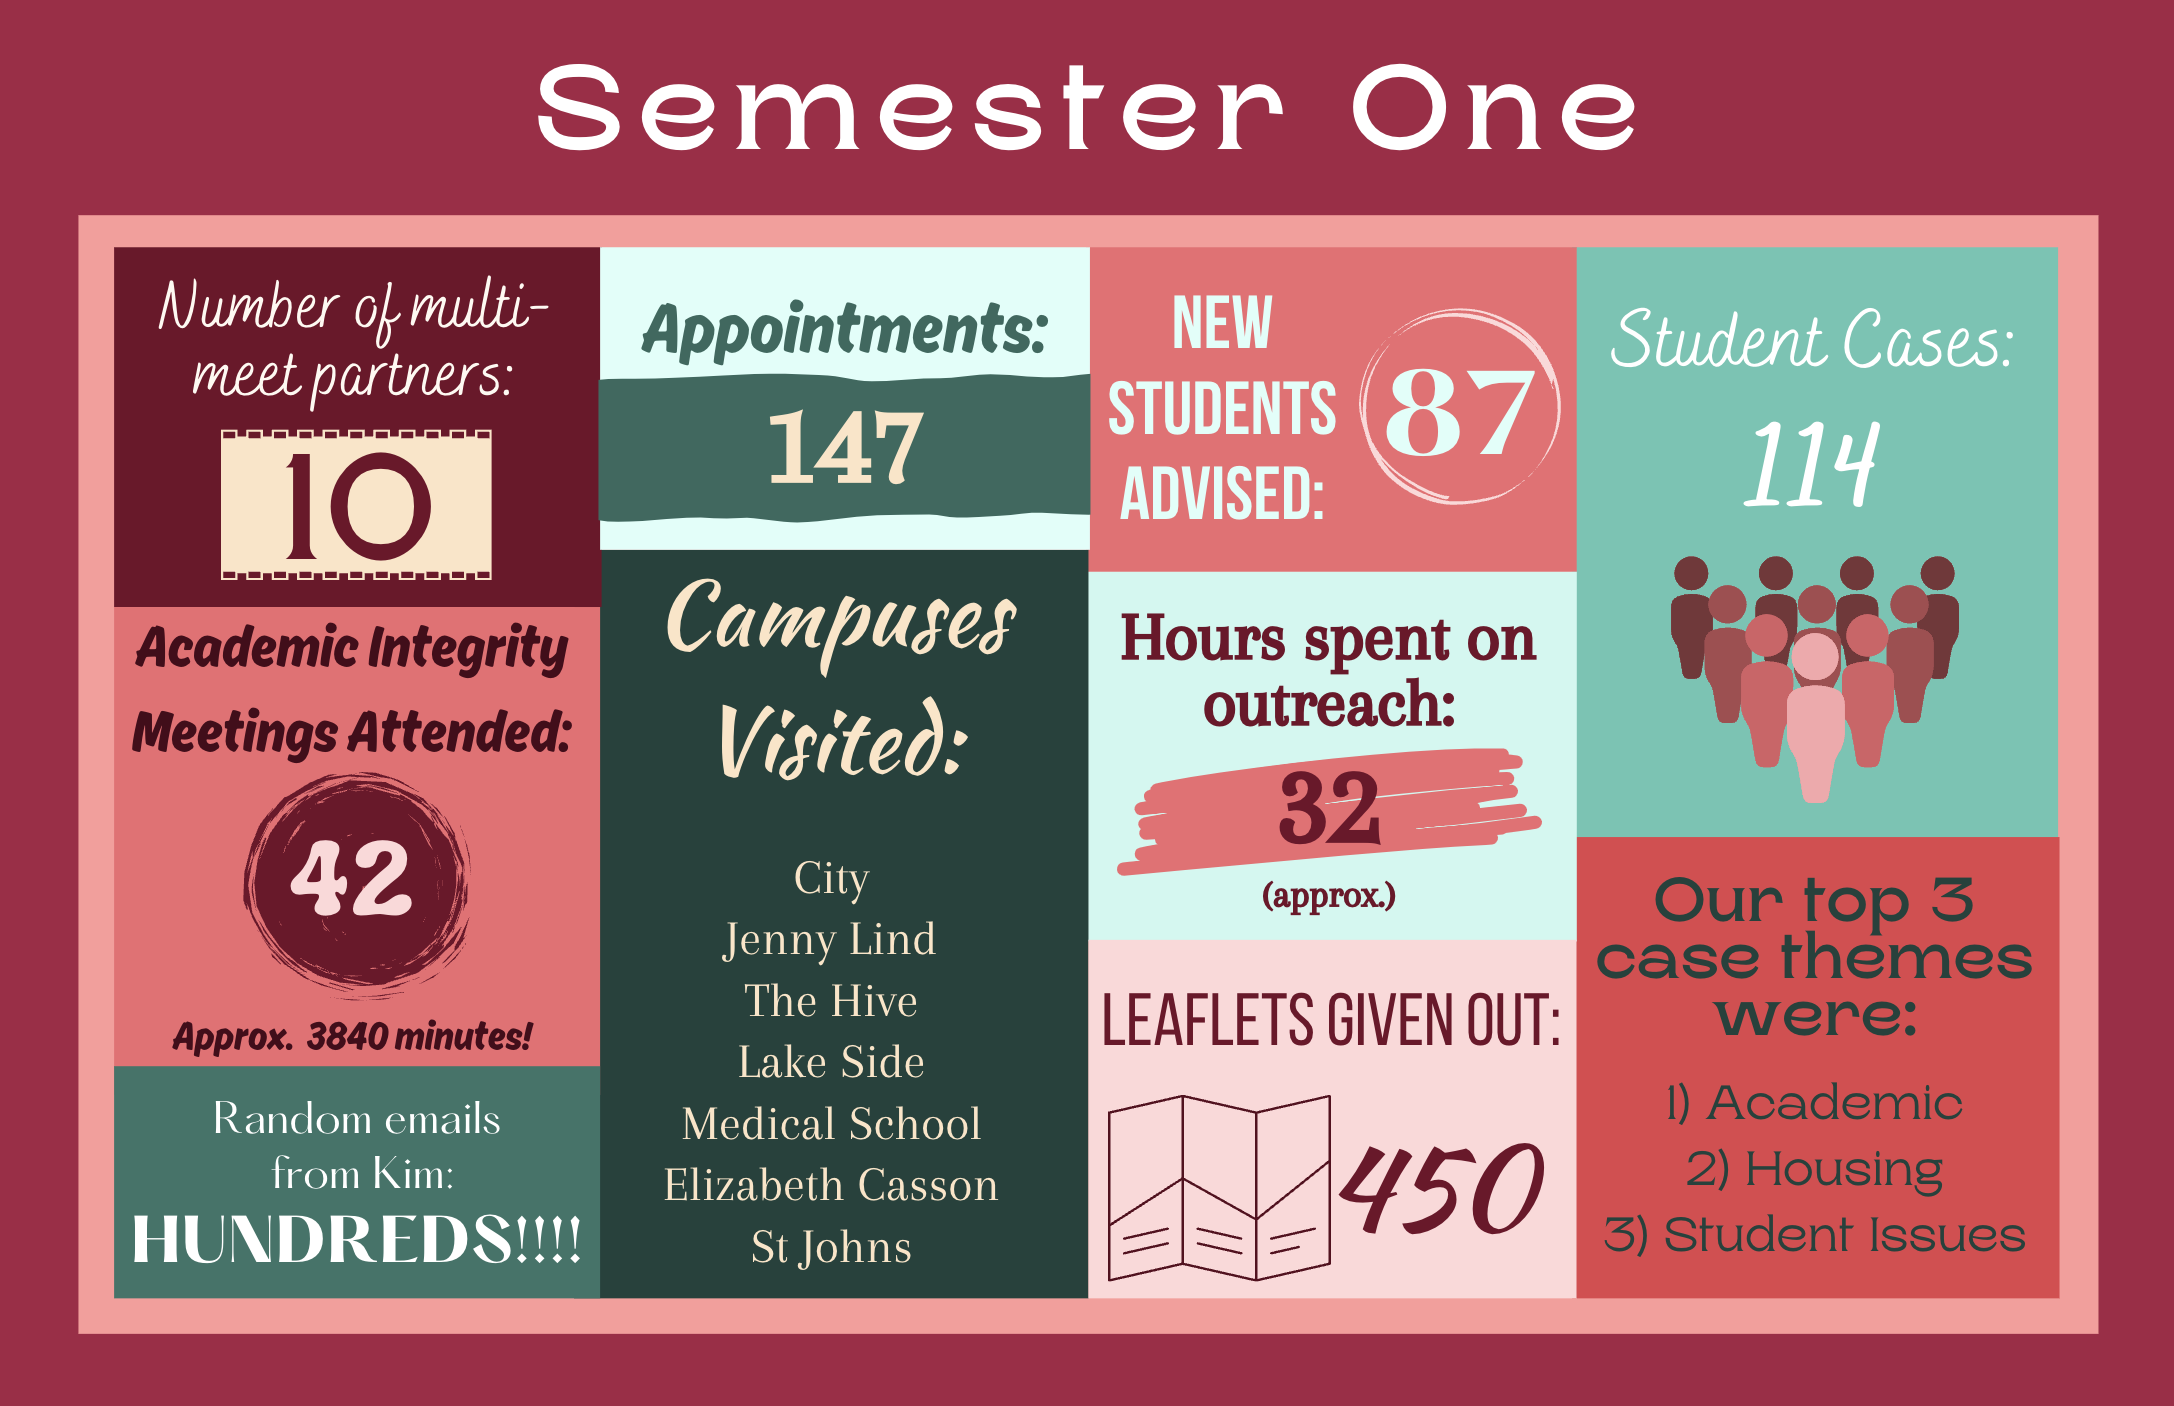 A graphic with a coral and mint theme titled 'semester one' made up of 10 boxes. Box 1: Number of multi-meet partners was 10. Box 2: Academic Integrity Meetings Attended was 42, approx 3840 minutes. Box 3: Random emails from Kim was hundreds. Box 4: Appointments were 147. Box 5: Campuses visited were City, Jenny Lind, The Hive, Lake Side, Medical School, Elizabeth Casson and St Johns. Box 6: New students advised was 87. Box 7: Hours spent on outreach was 32 approx. Box 8: Leaflets given out was 450. Box 9: Student cases were 114. Box 10: Our top 3 case themes were 1) academic, 2) housing and 3) student issues.